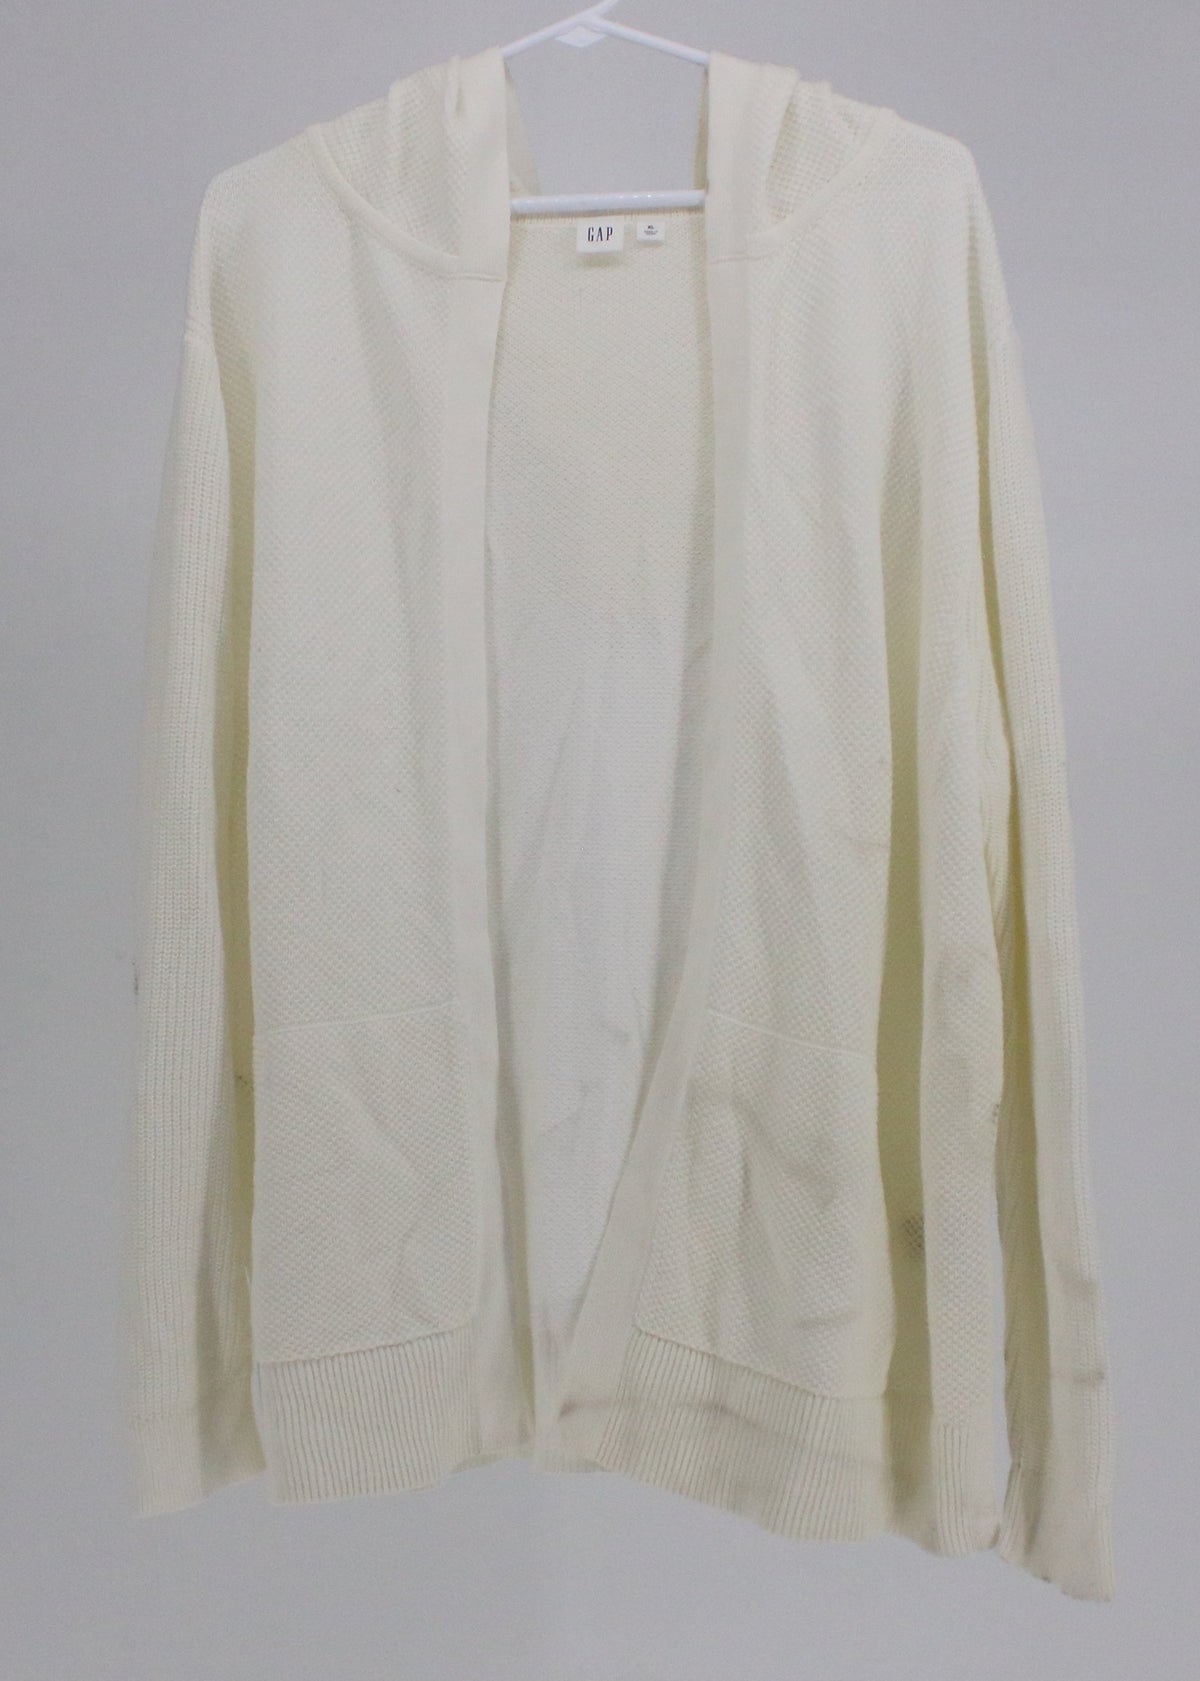 Gap Off White Hooded Open Cardigan Sweater